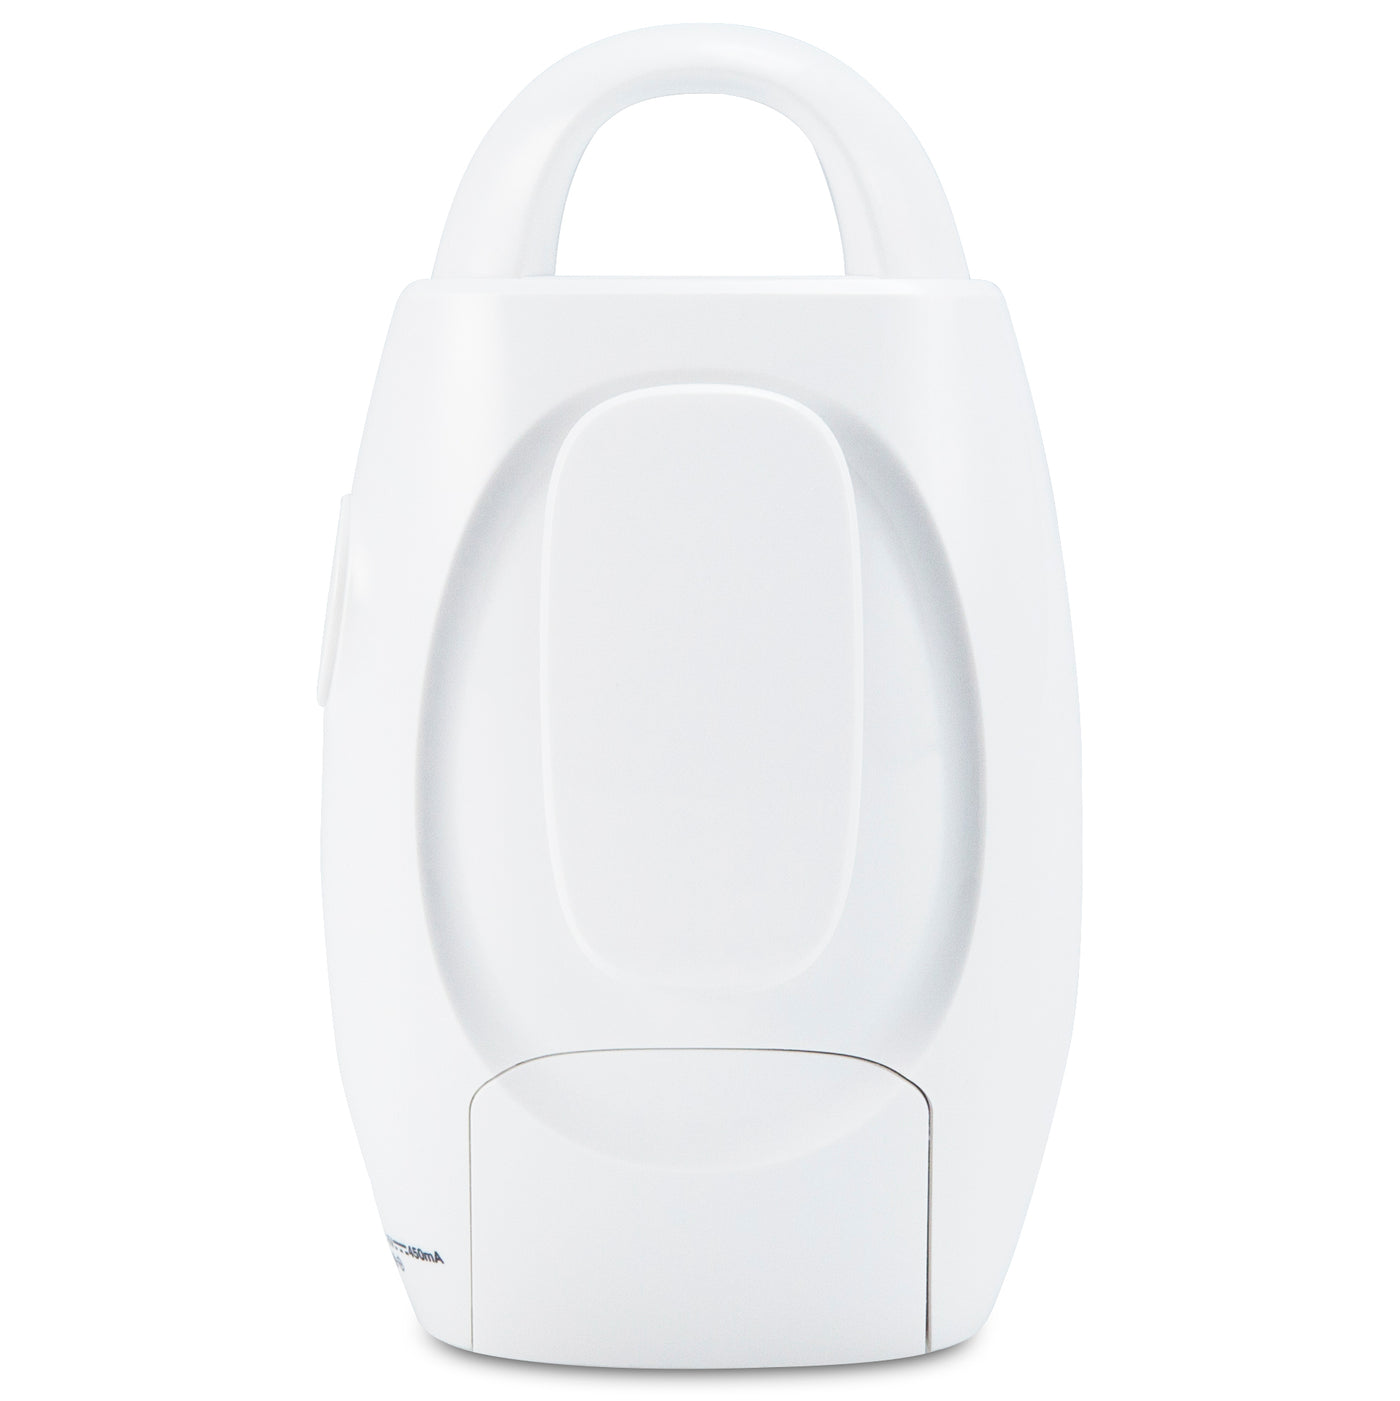 Alecto DBX-84 - DECT baby monitor owl, white/mint